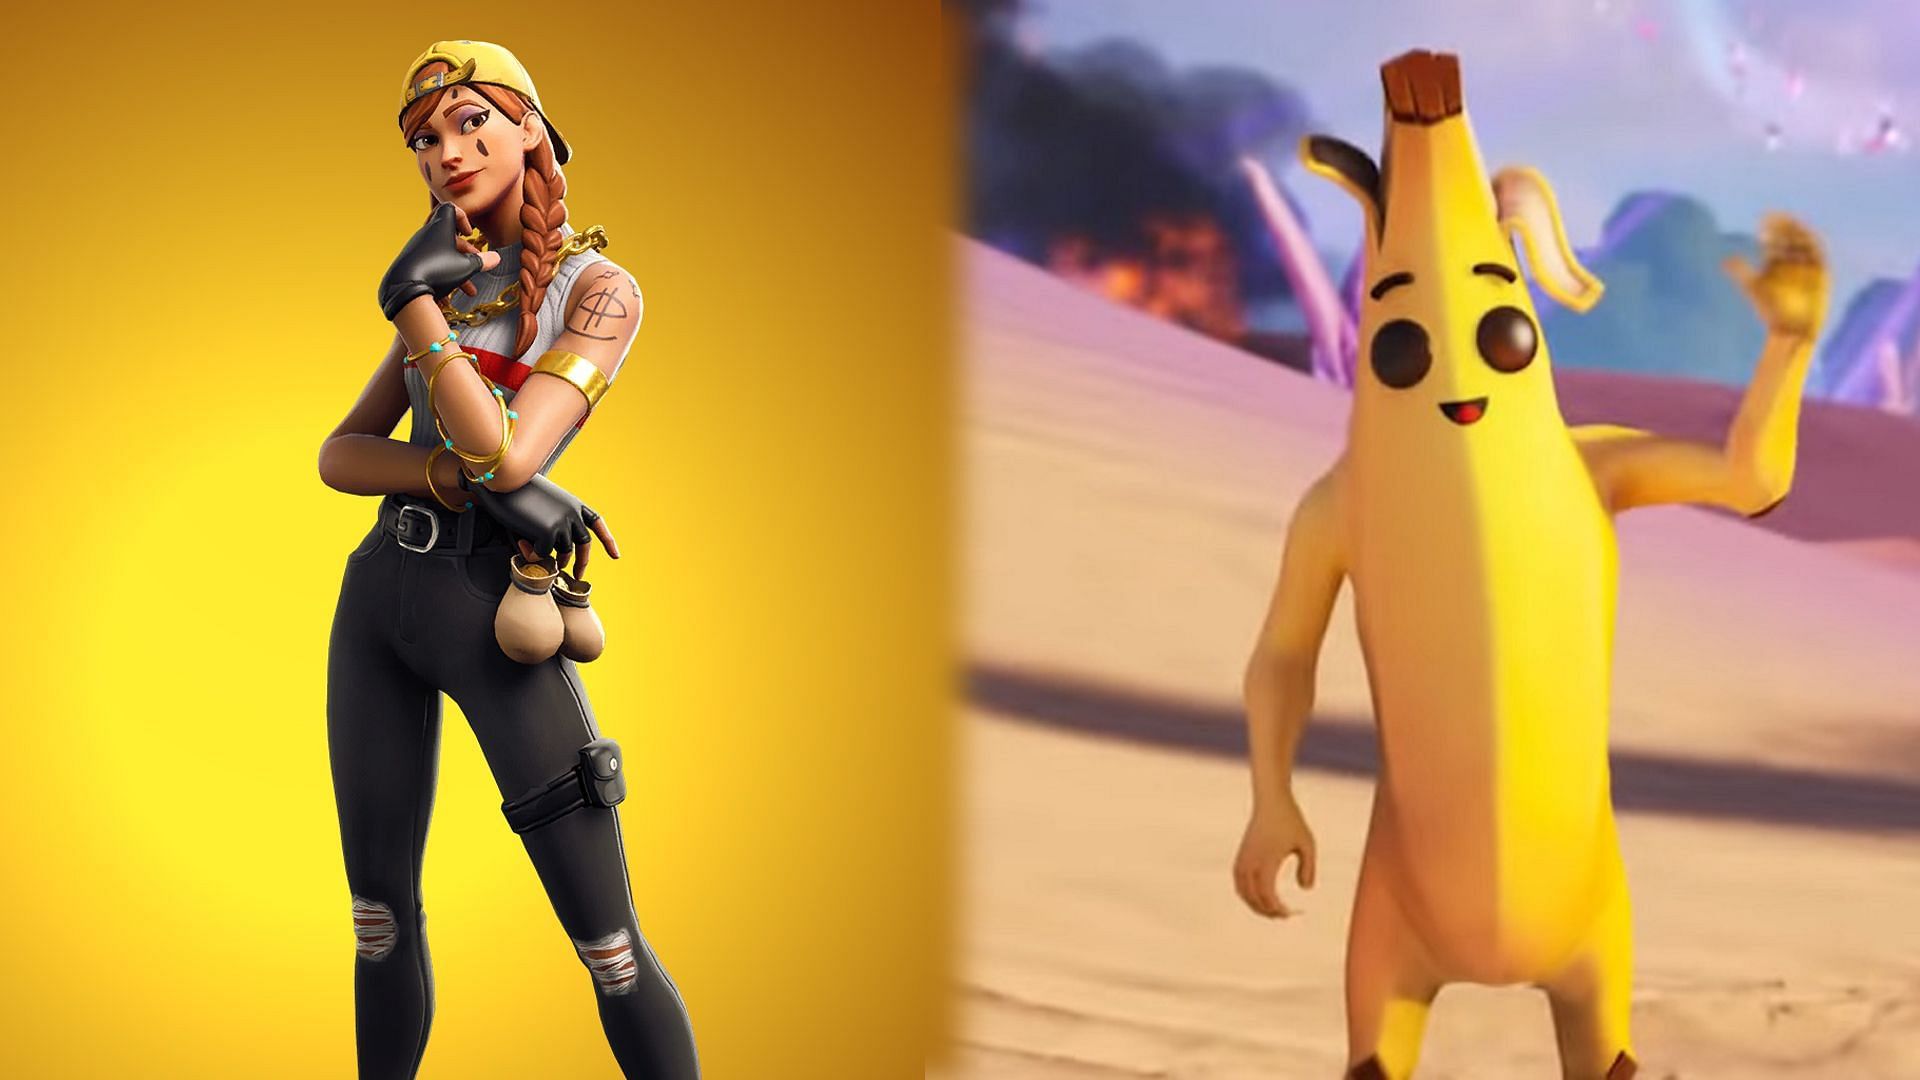 Some skins in Fortnite are used almost exclusively by sweats or noobs (Image via Sportskeeda)